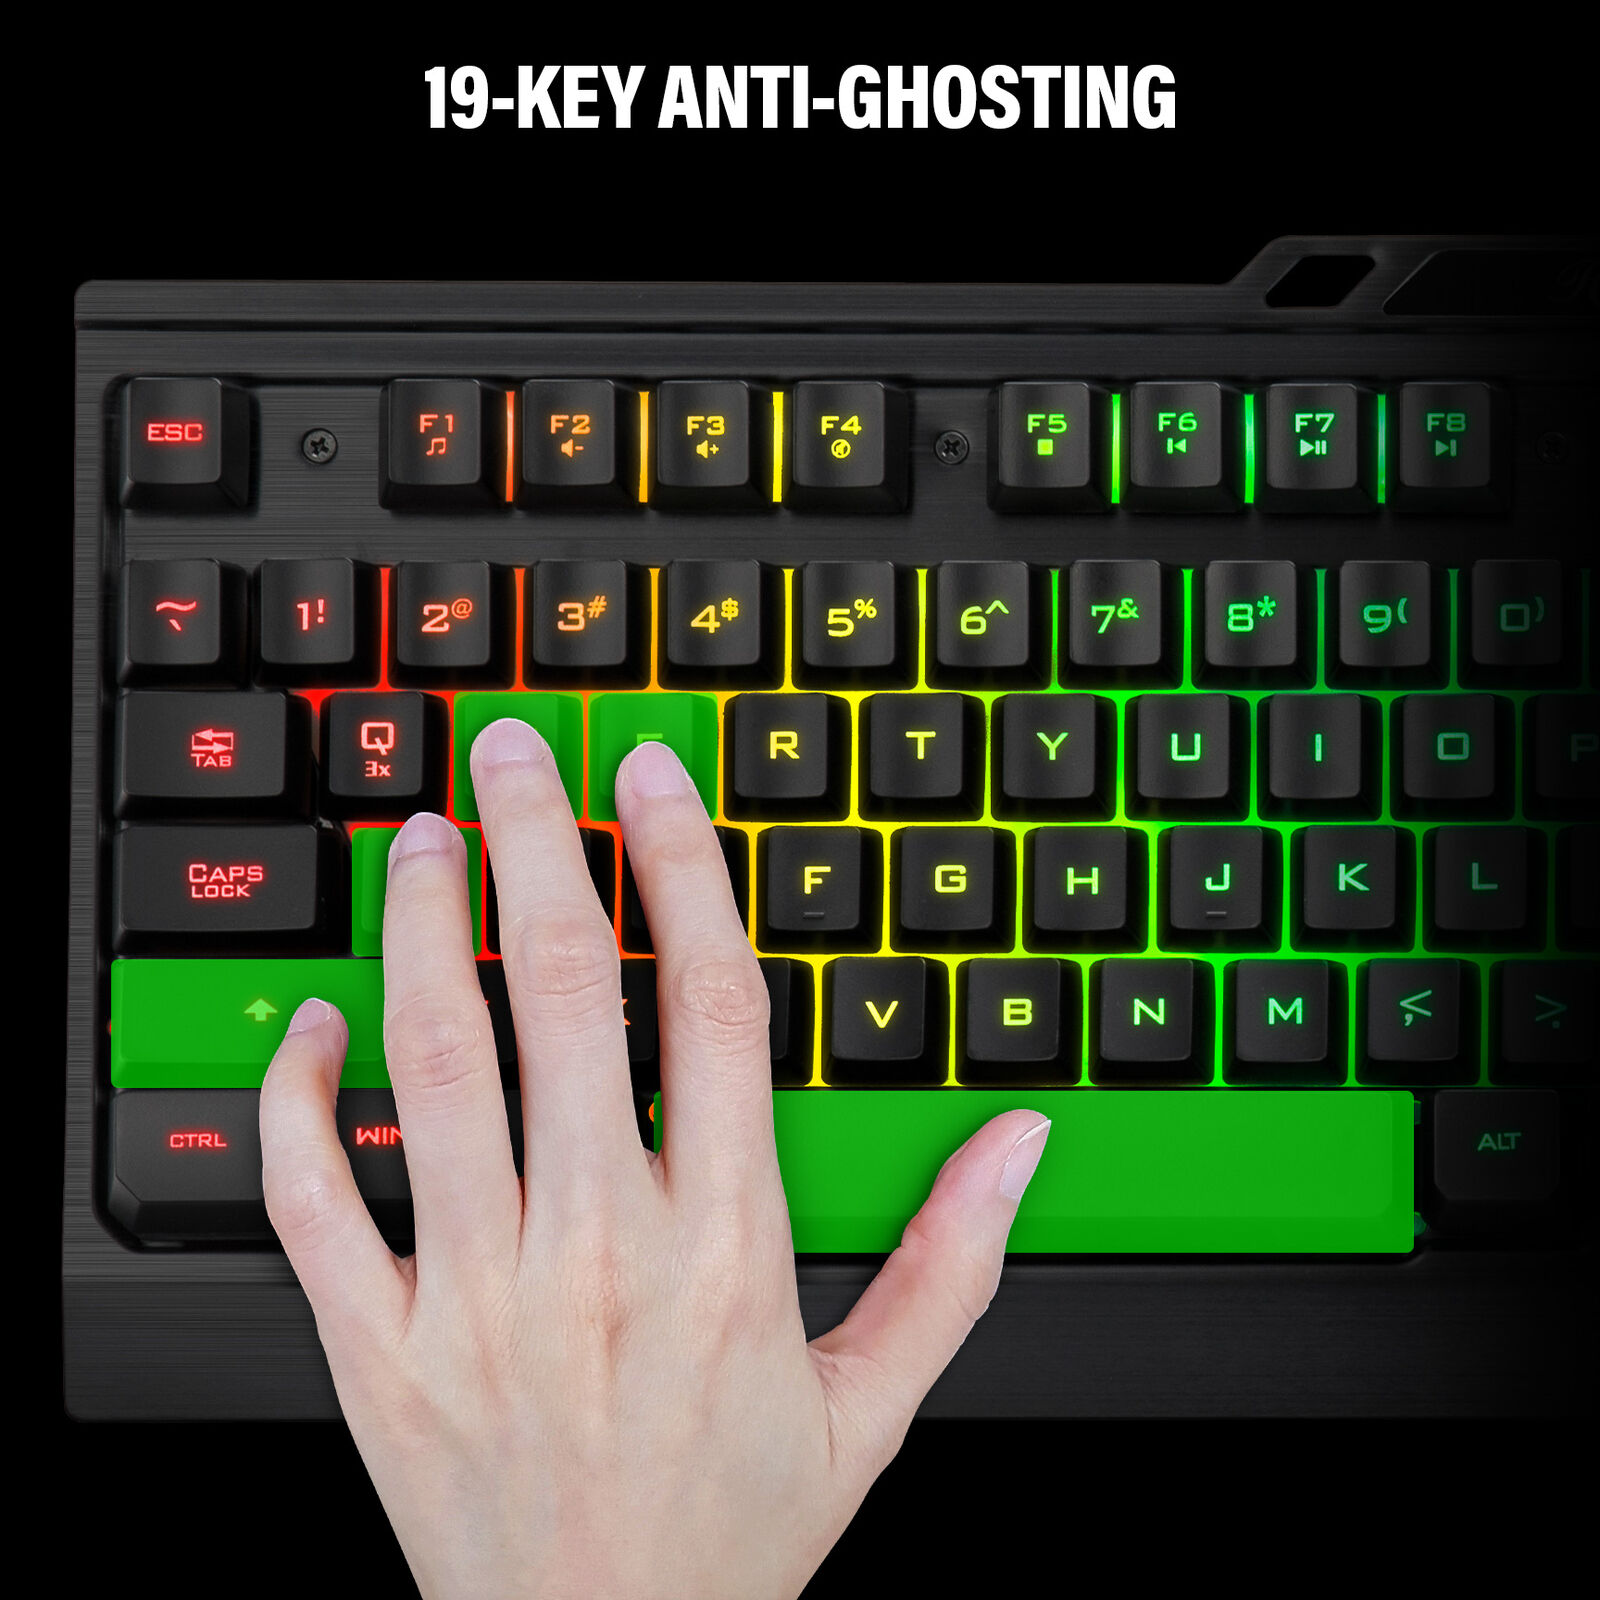 With anti-ghosting all the keys that are pressed simultaneously are registered.